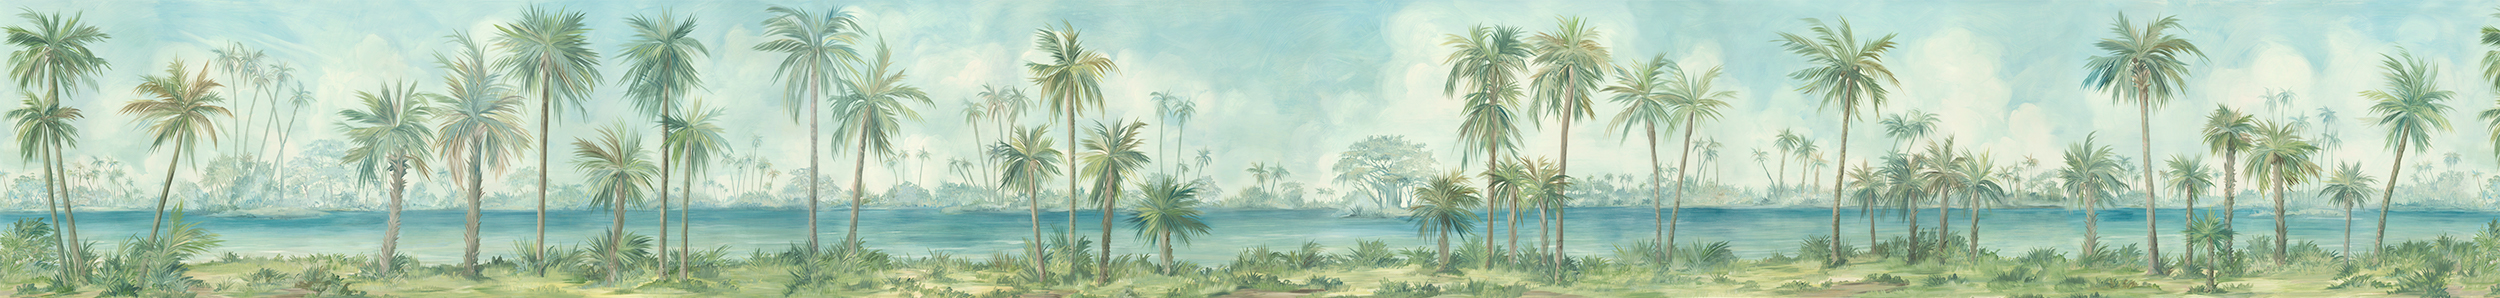 Hand painted tropical scenic mural of Palm Beach with palm trees